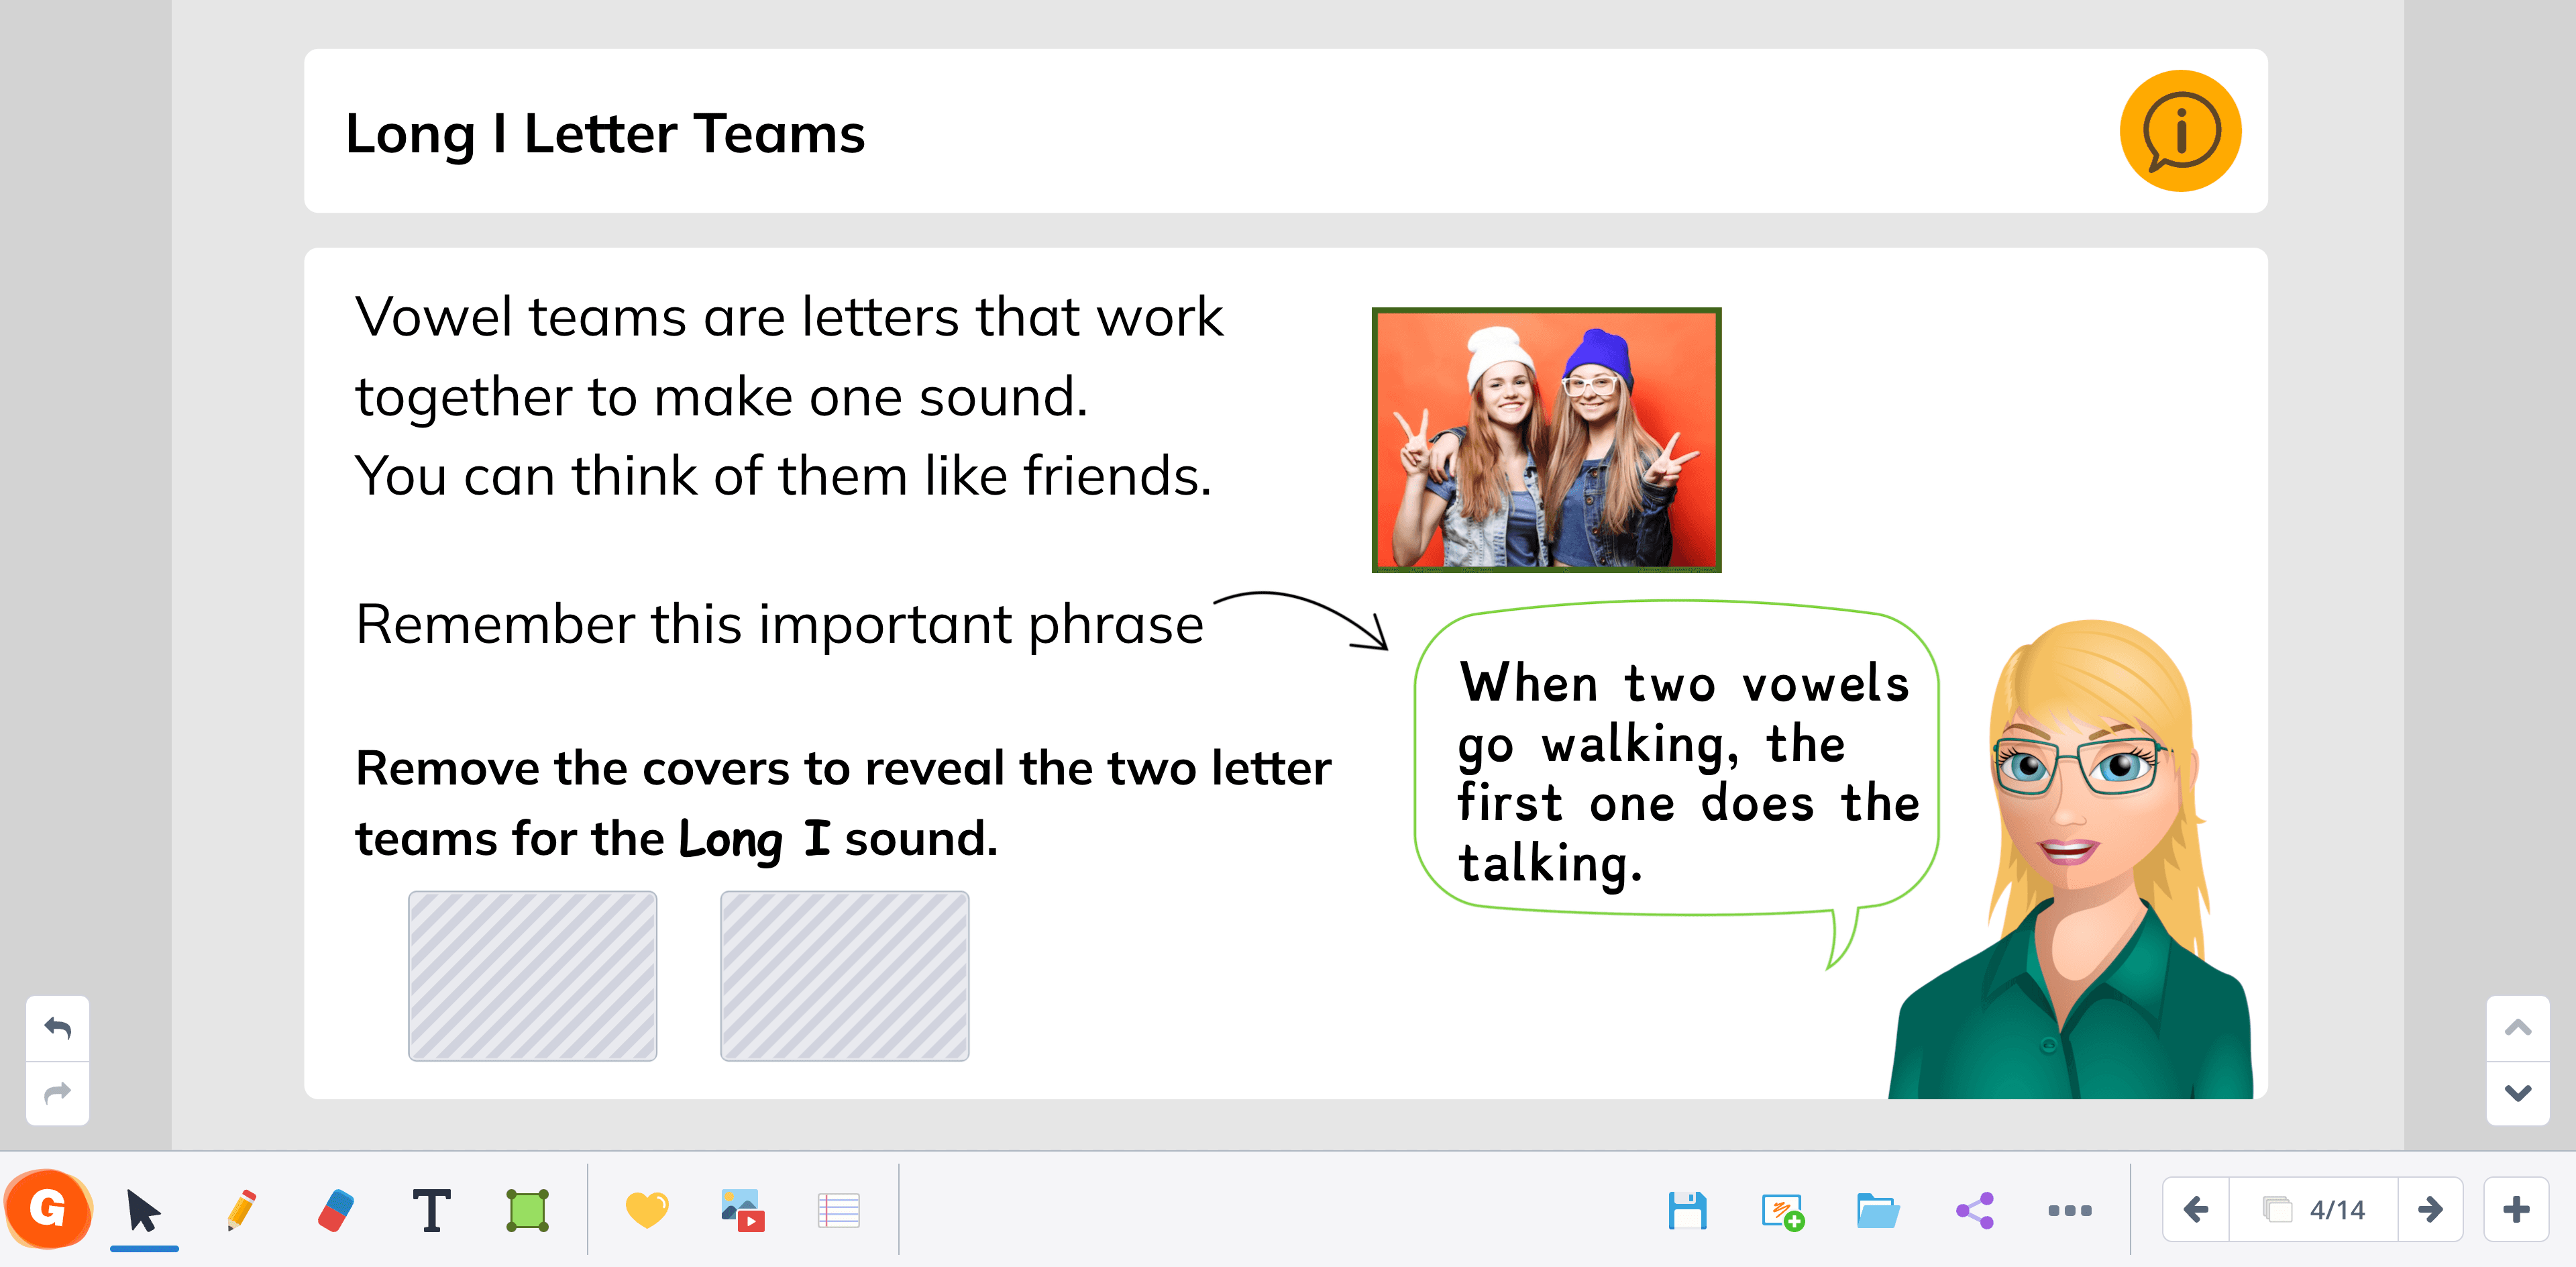 Example of a phonics lesson about Long I letter teams